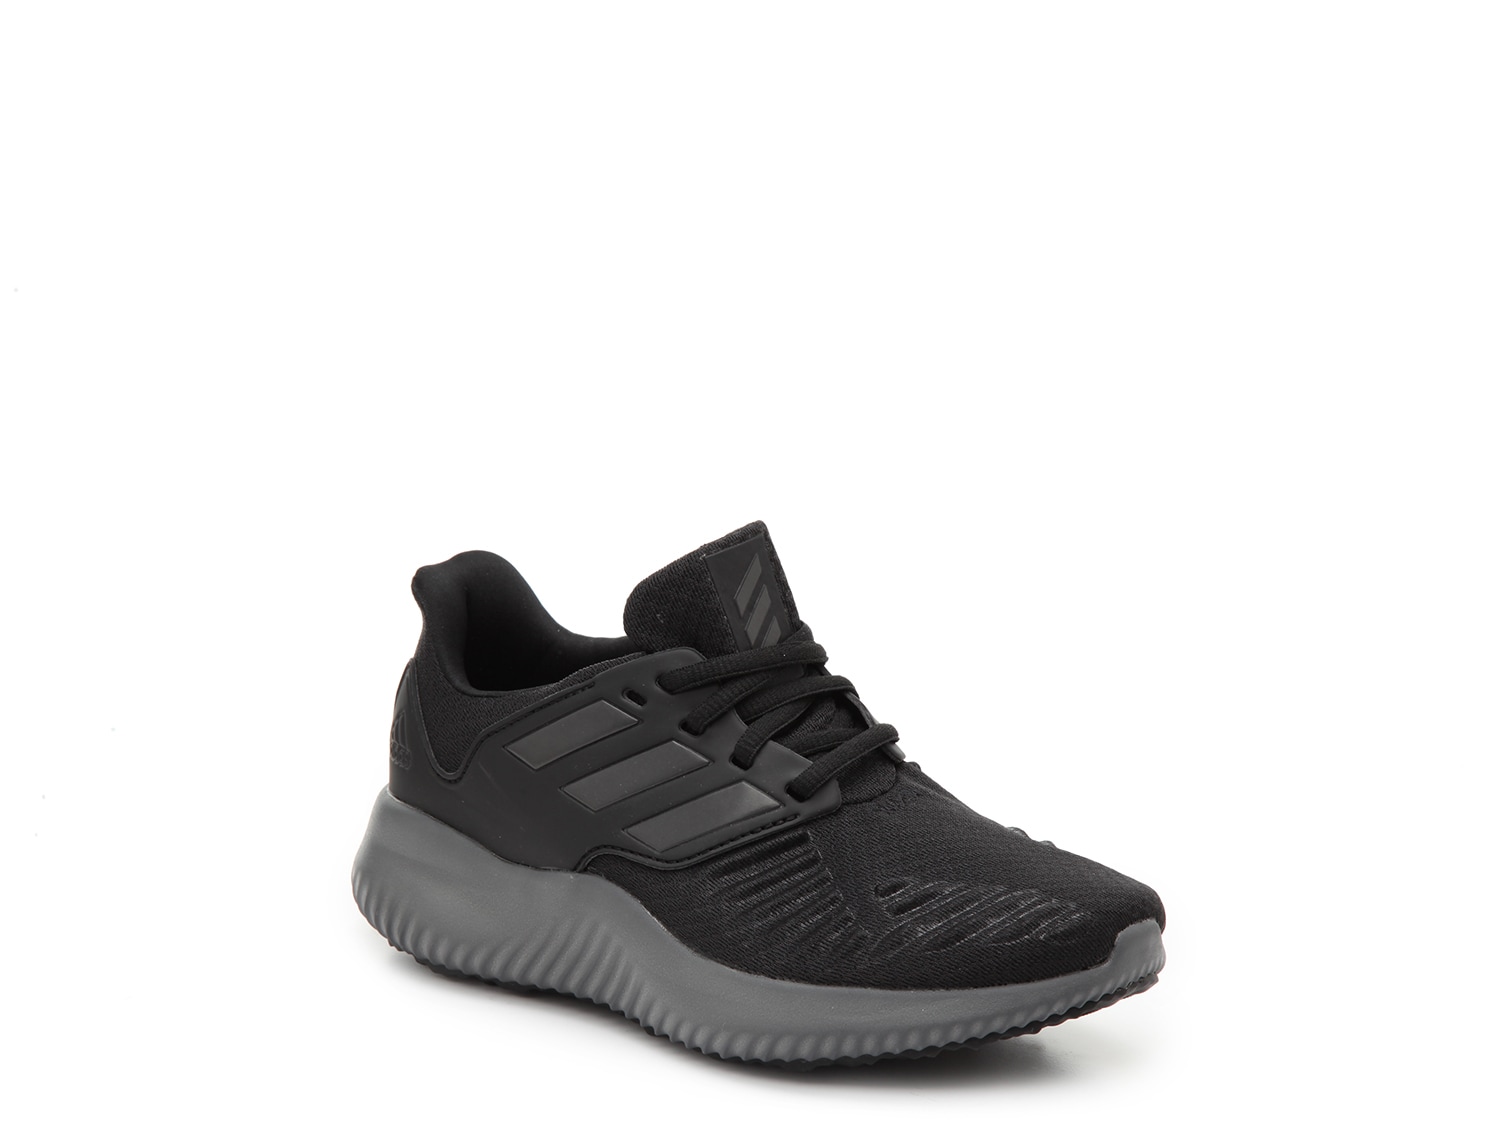 adidas Alphabounce Youth Running Shoe | DSW